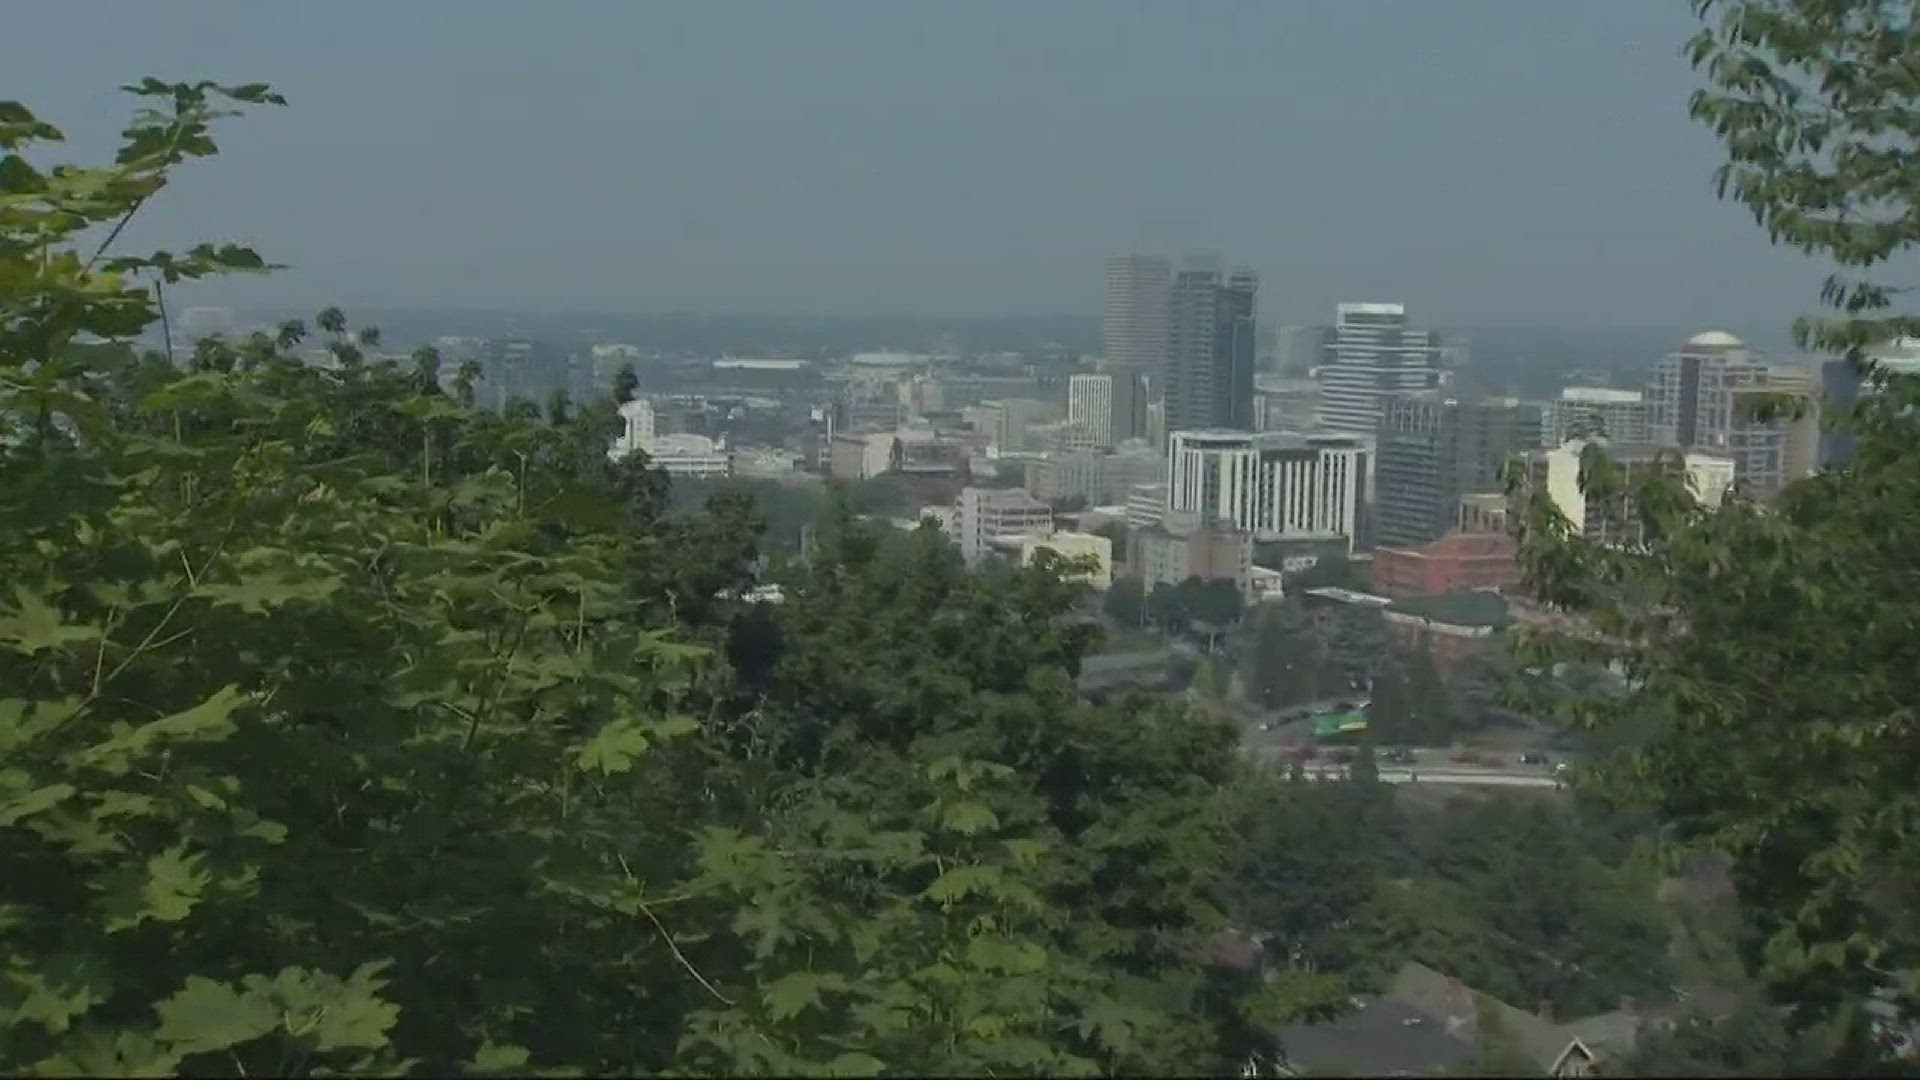 Foul air: Smoke and heat smother Portland